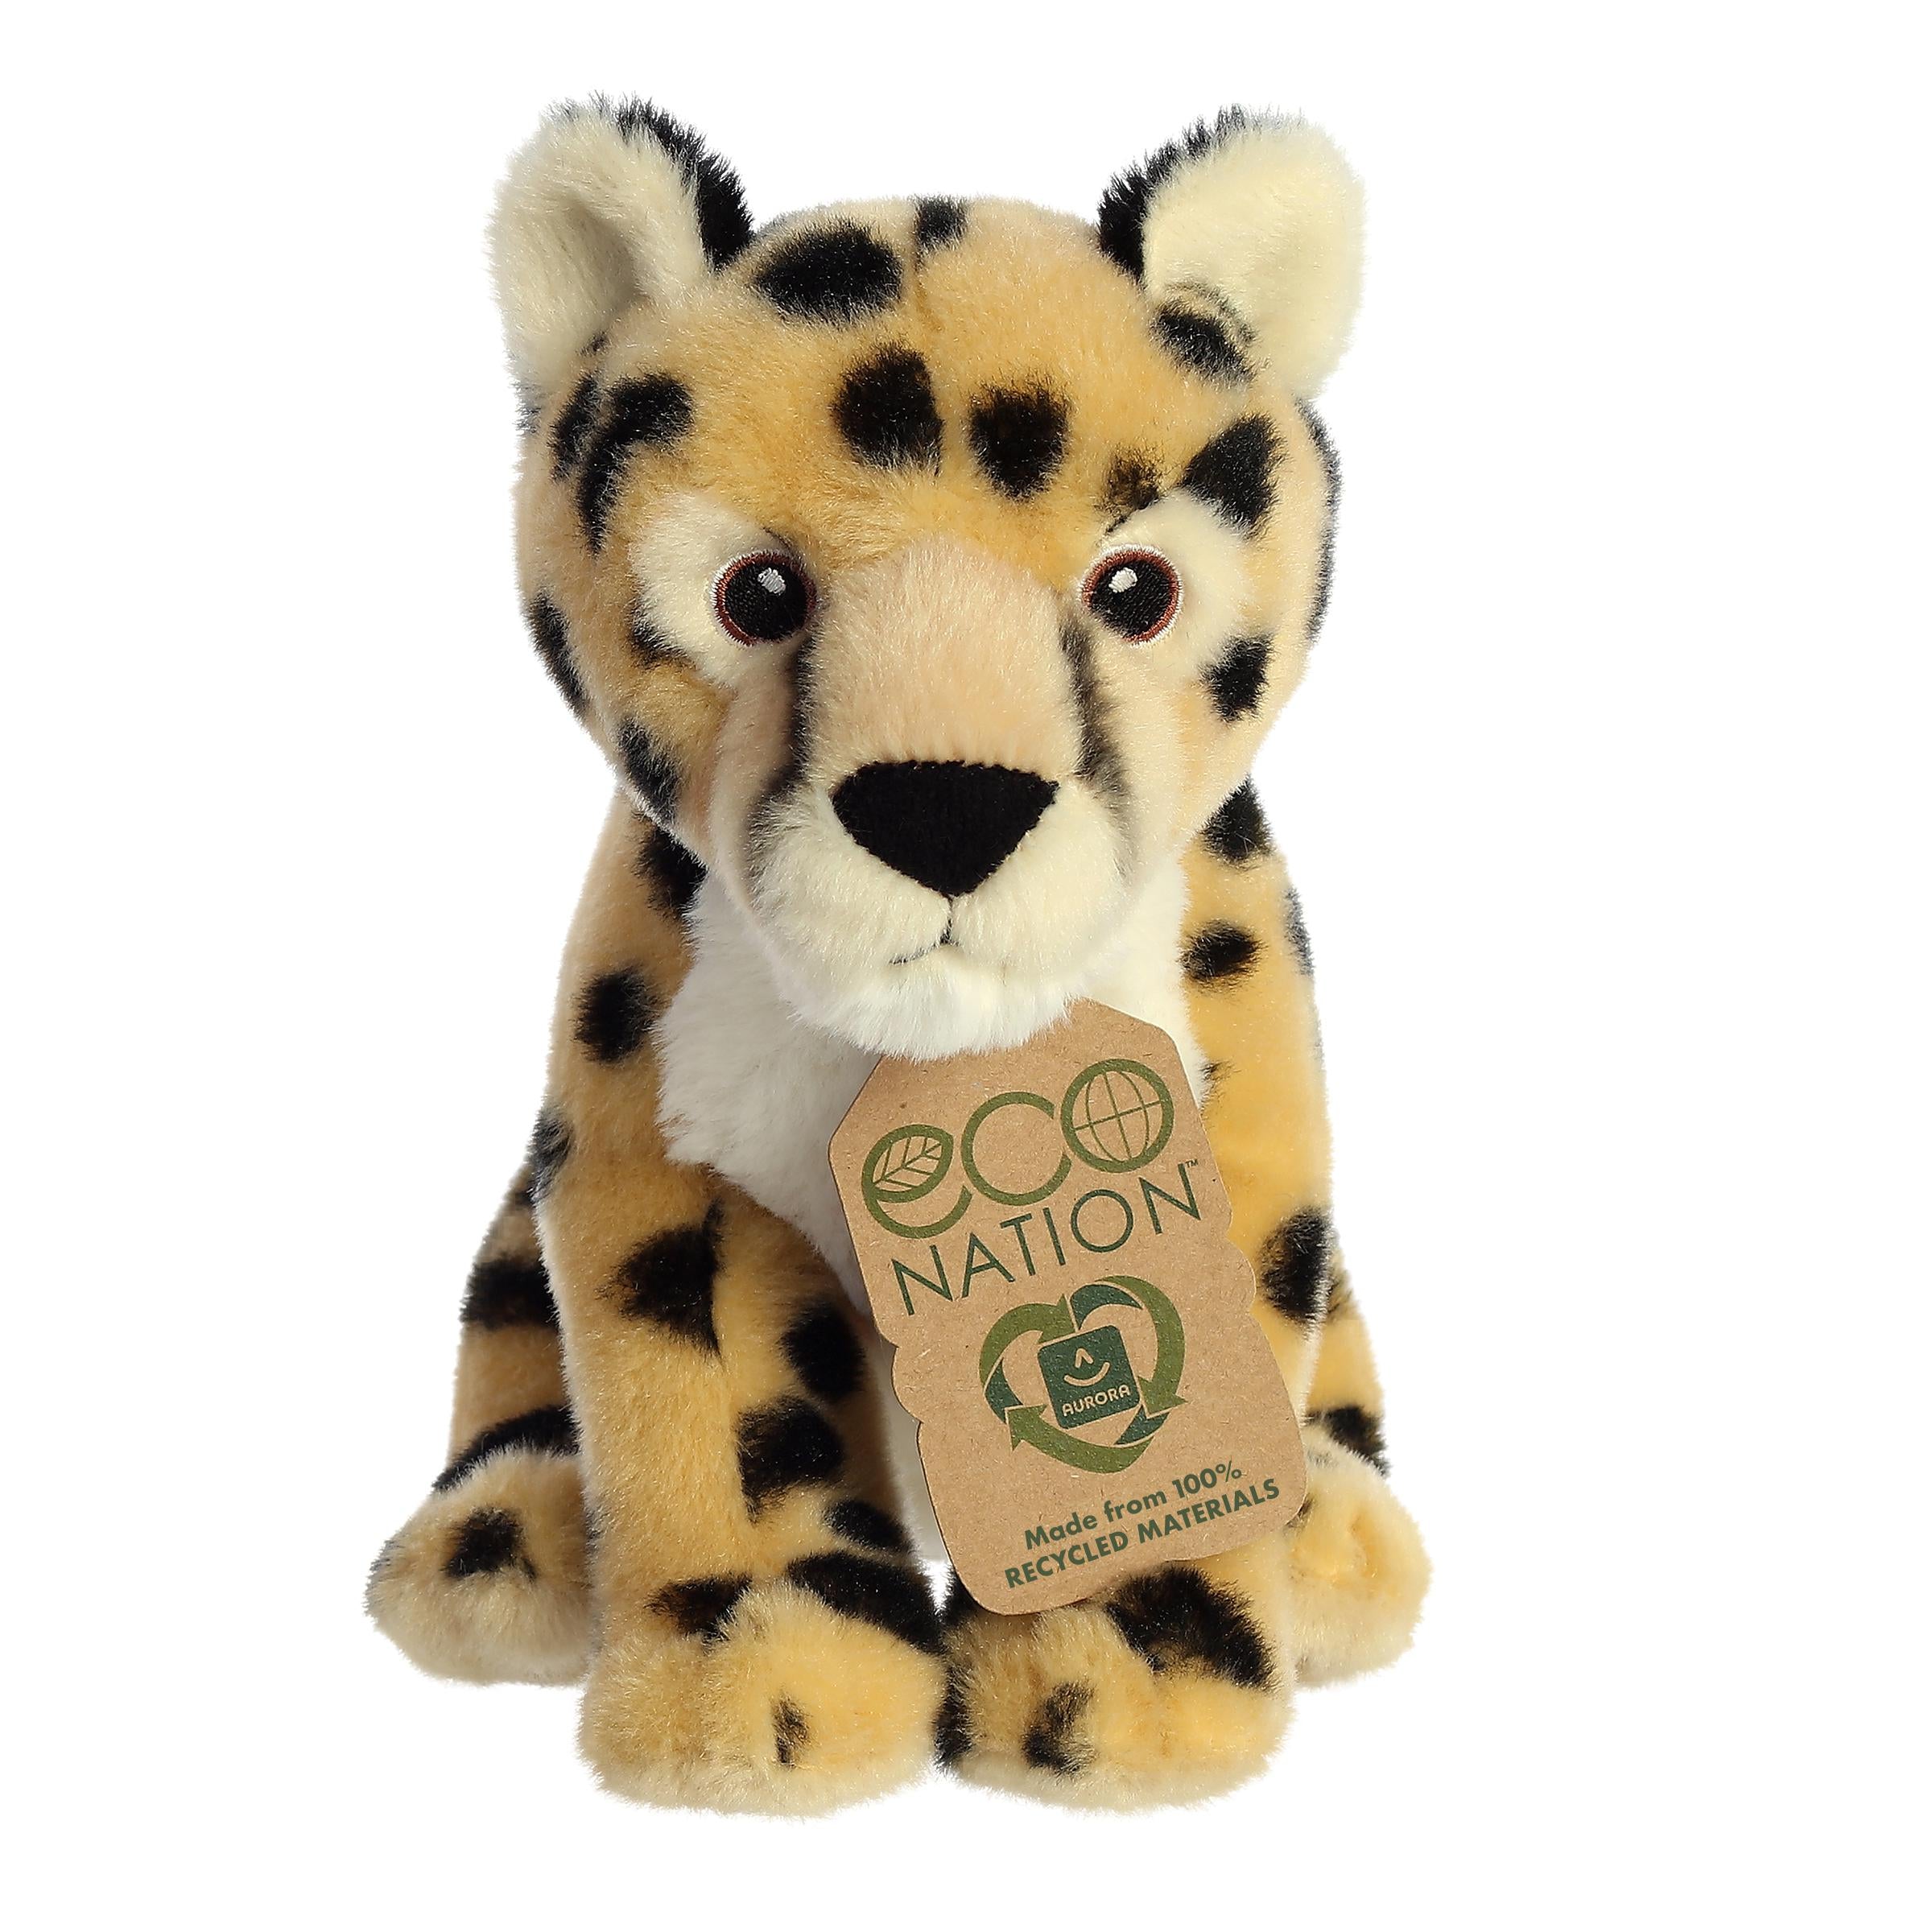 A delightful cheetah plush with traditional black spots on a golden-yellow coat, embroidered eyes, and an eco-nation tag